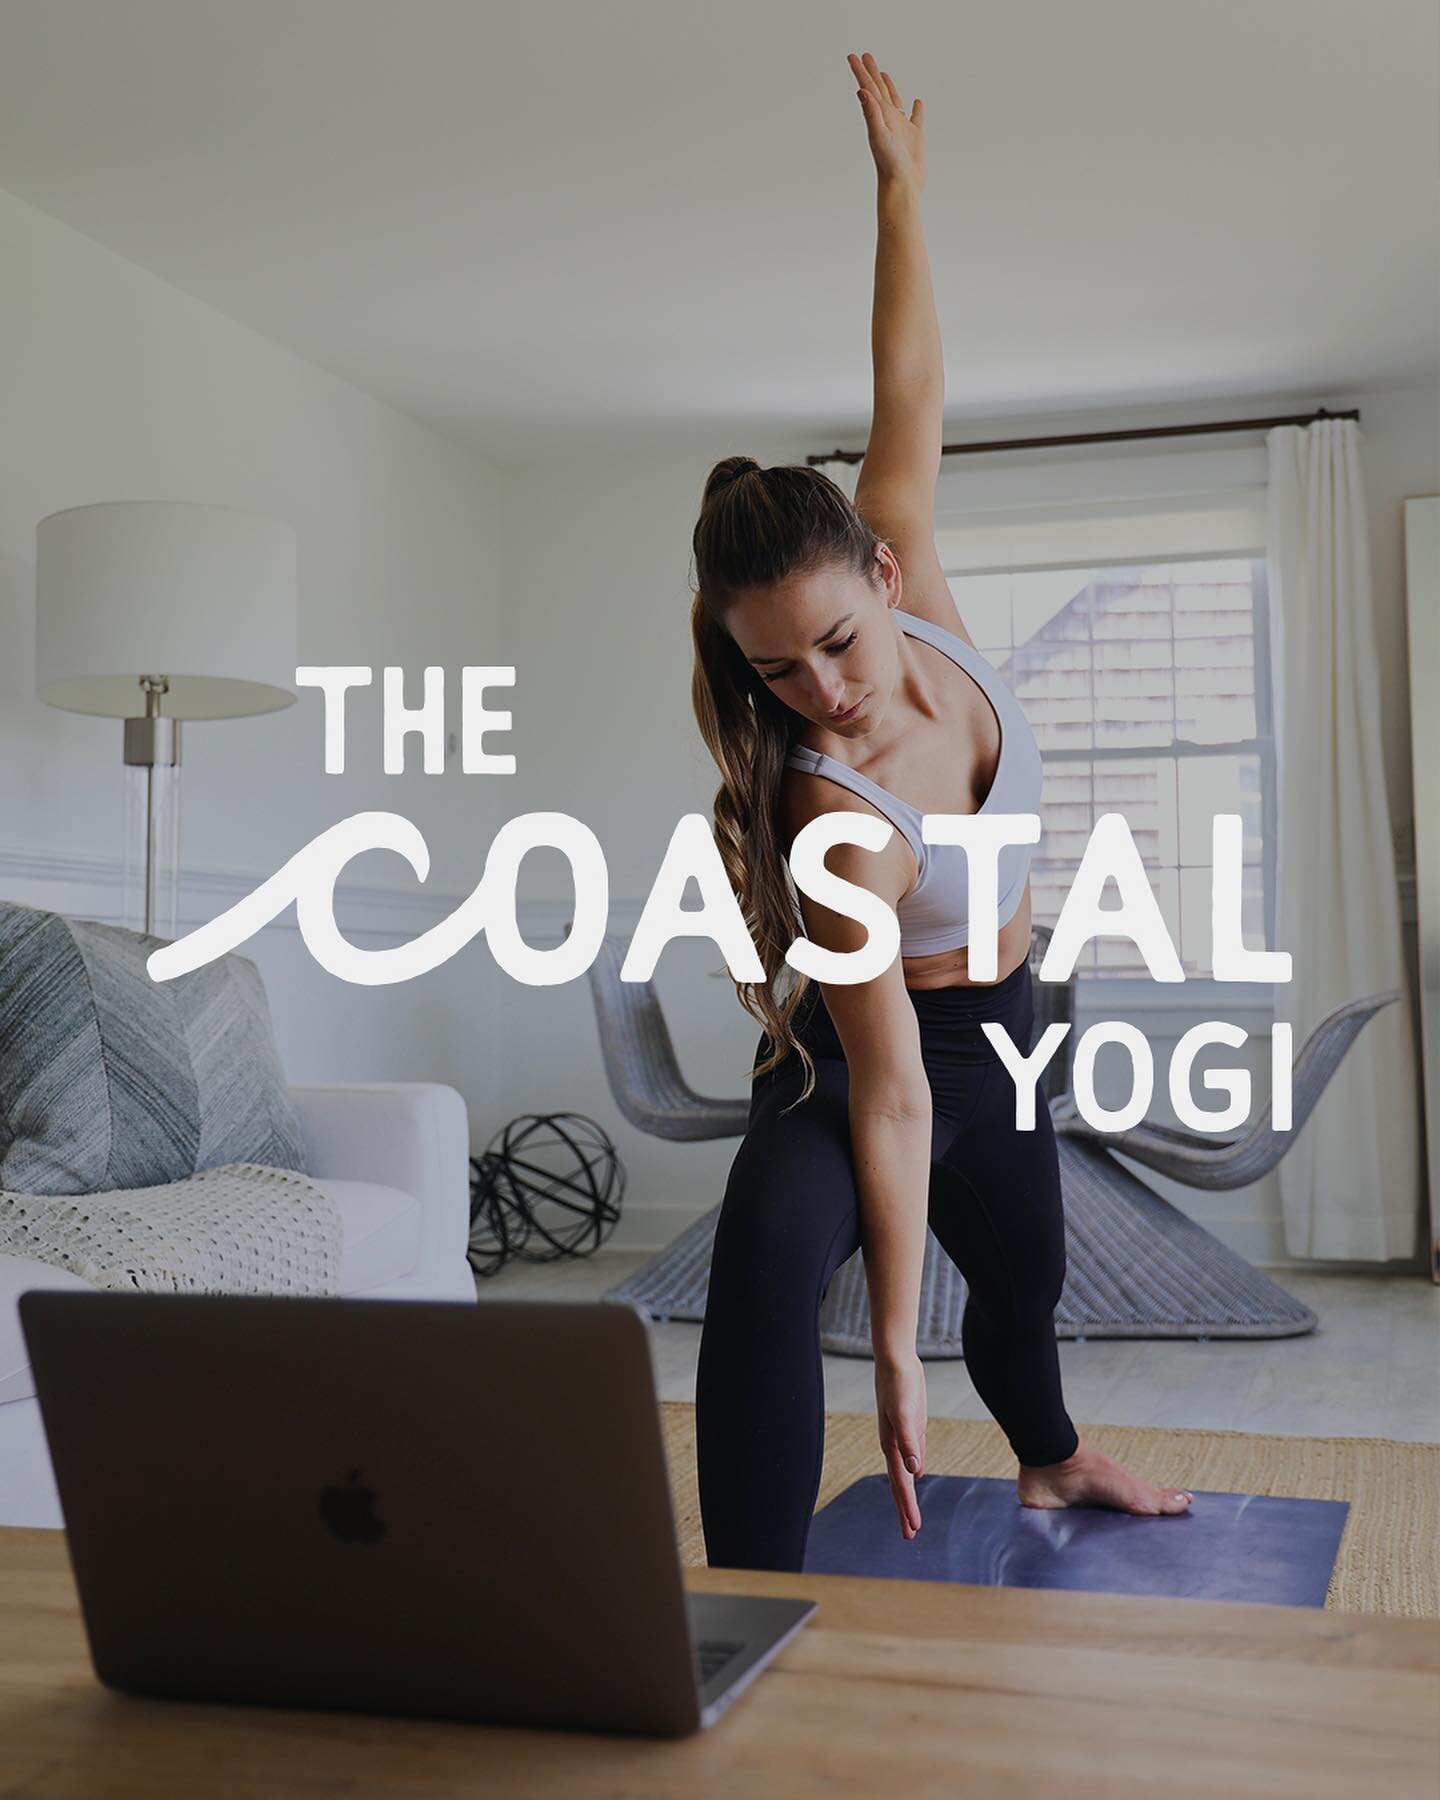 I&rsquo;m still swooning over the custom lettering we integrated into @thecoastalyogi &lsquo;s primary brand mark. I love the flow of the letters and I&rsquo;m SO thrilled she trusted me with this concept. Huge props to Sarah for selecting the best d